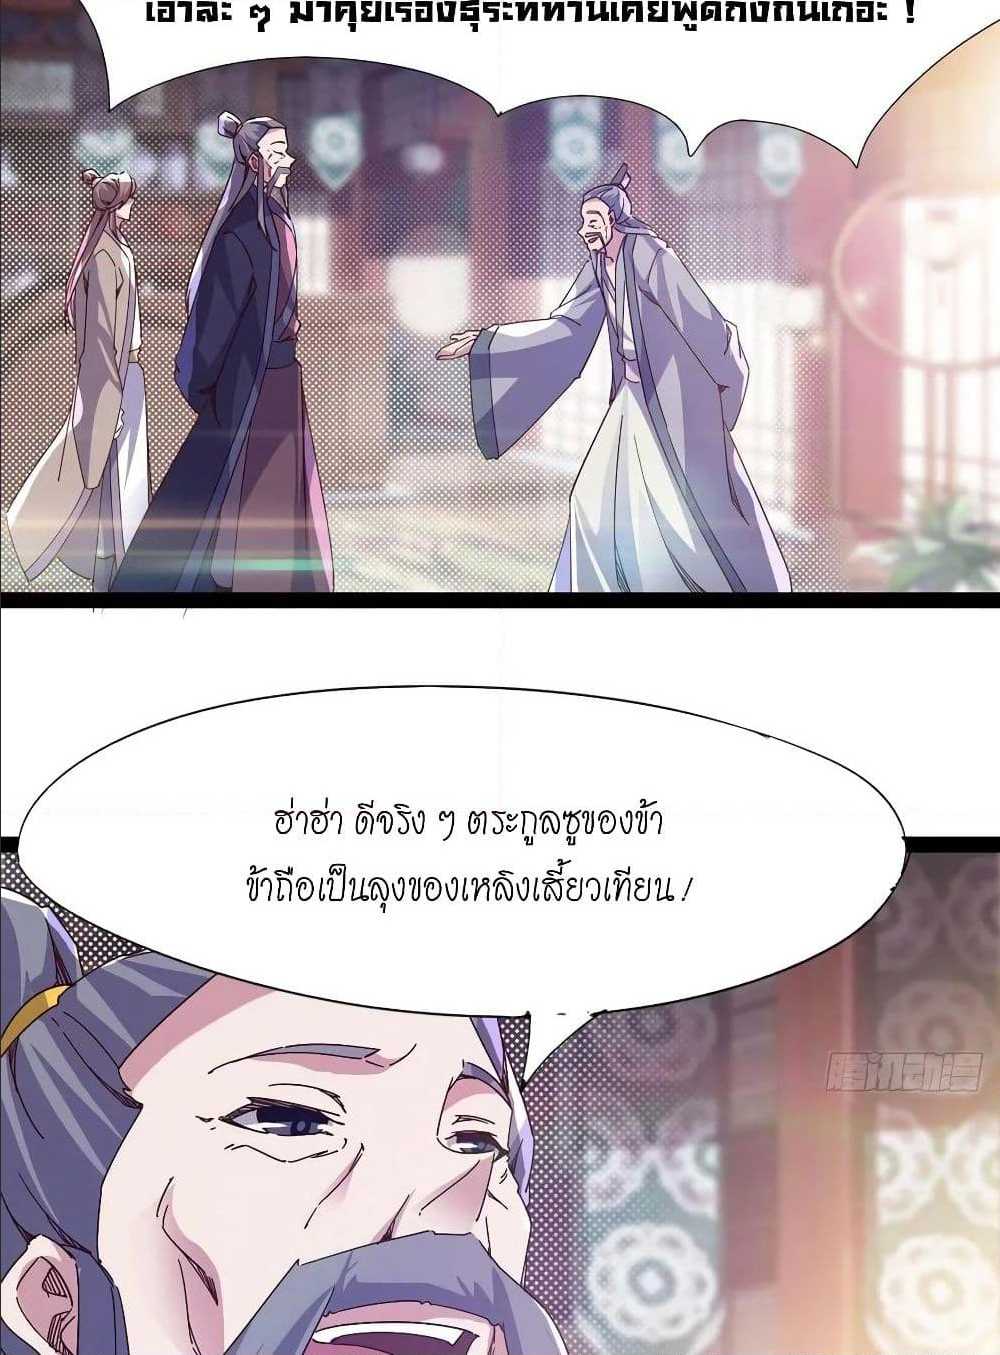 Path of the Sword 55 (5)